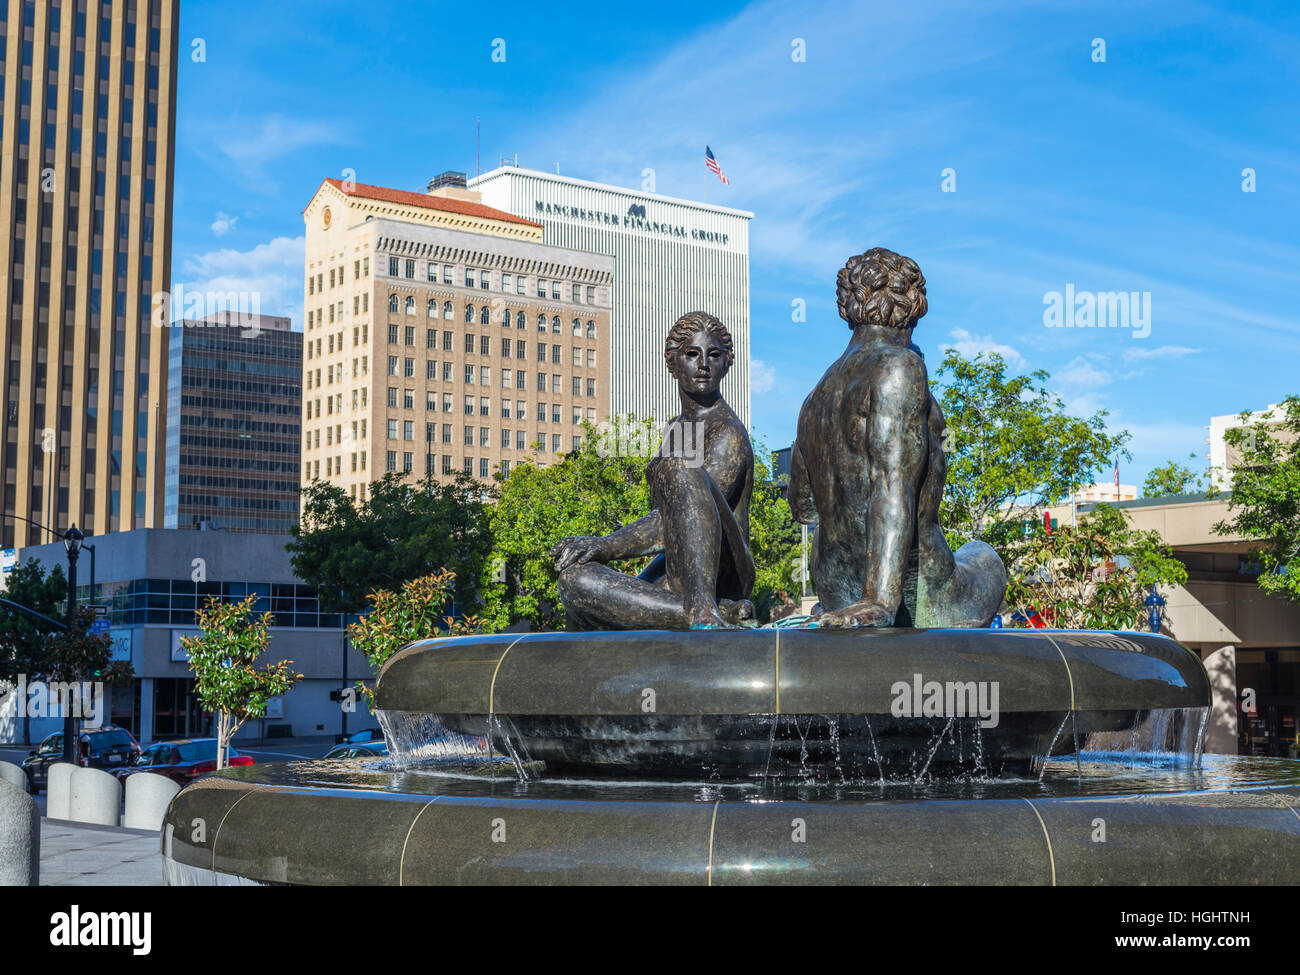 Fountain of Two Oceans sculpture and water fountain in downtown San Diego, California, USA. Stock Photo